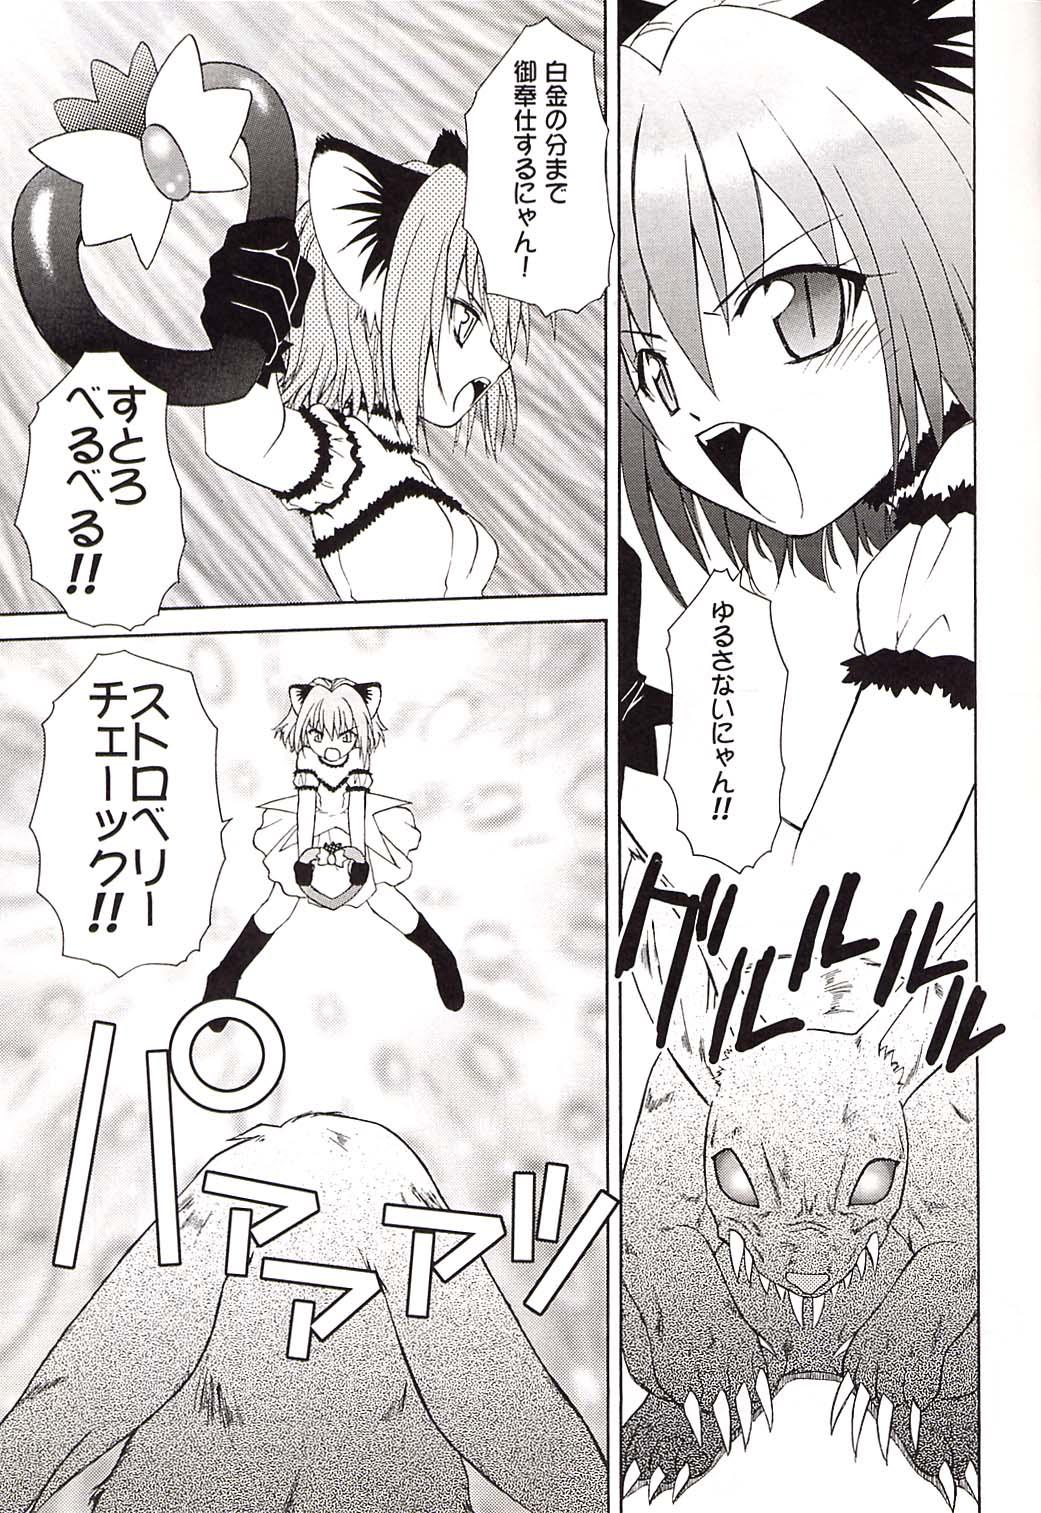 Exhibition Strawberry sex - Tokyo mew mew Youth Porn - Page 10